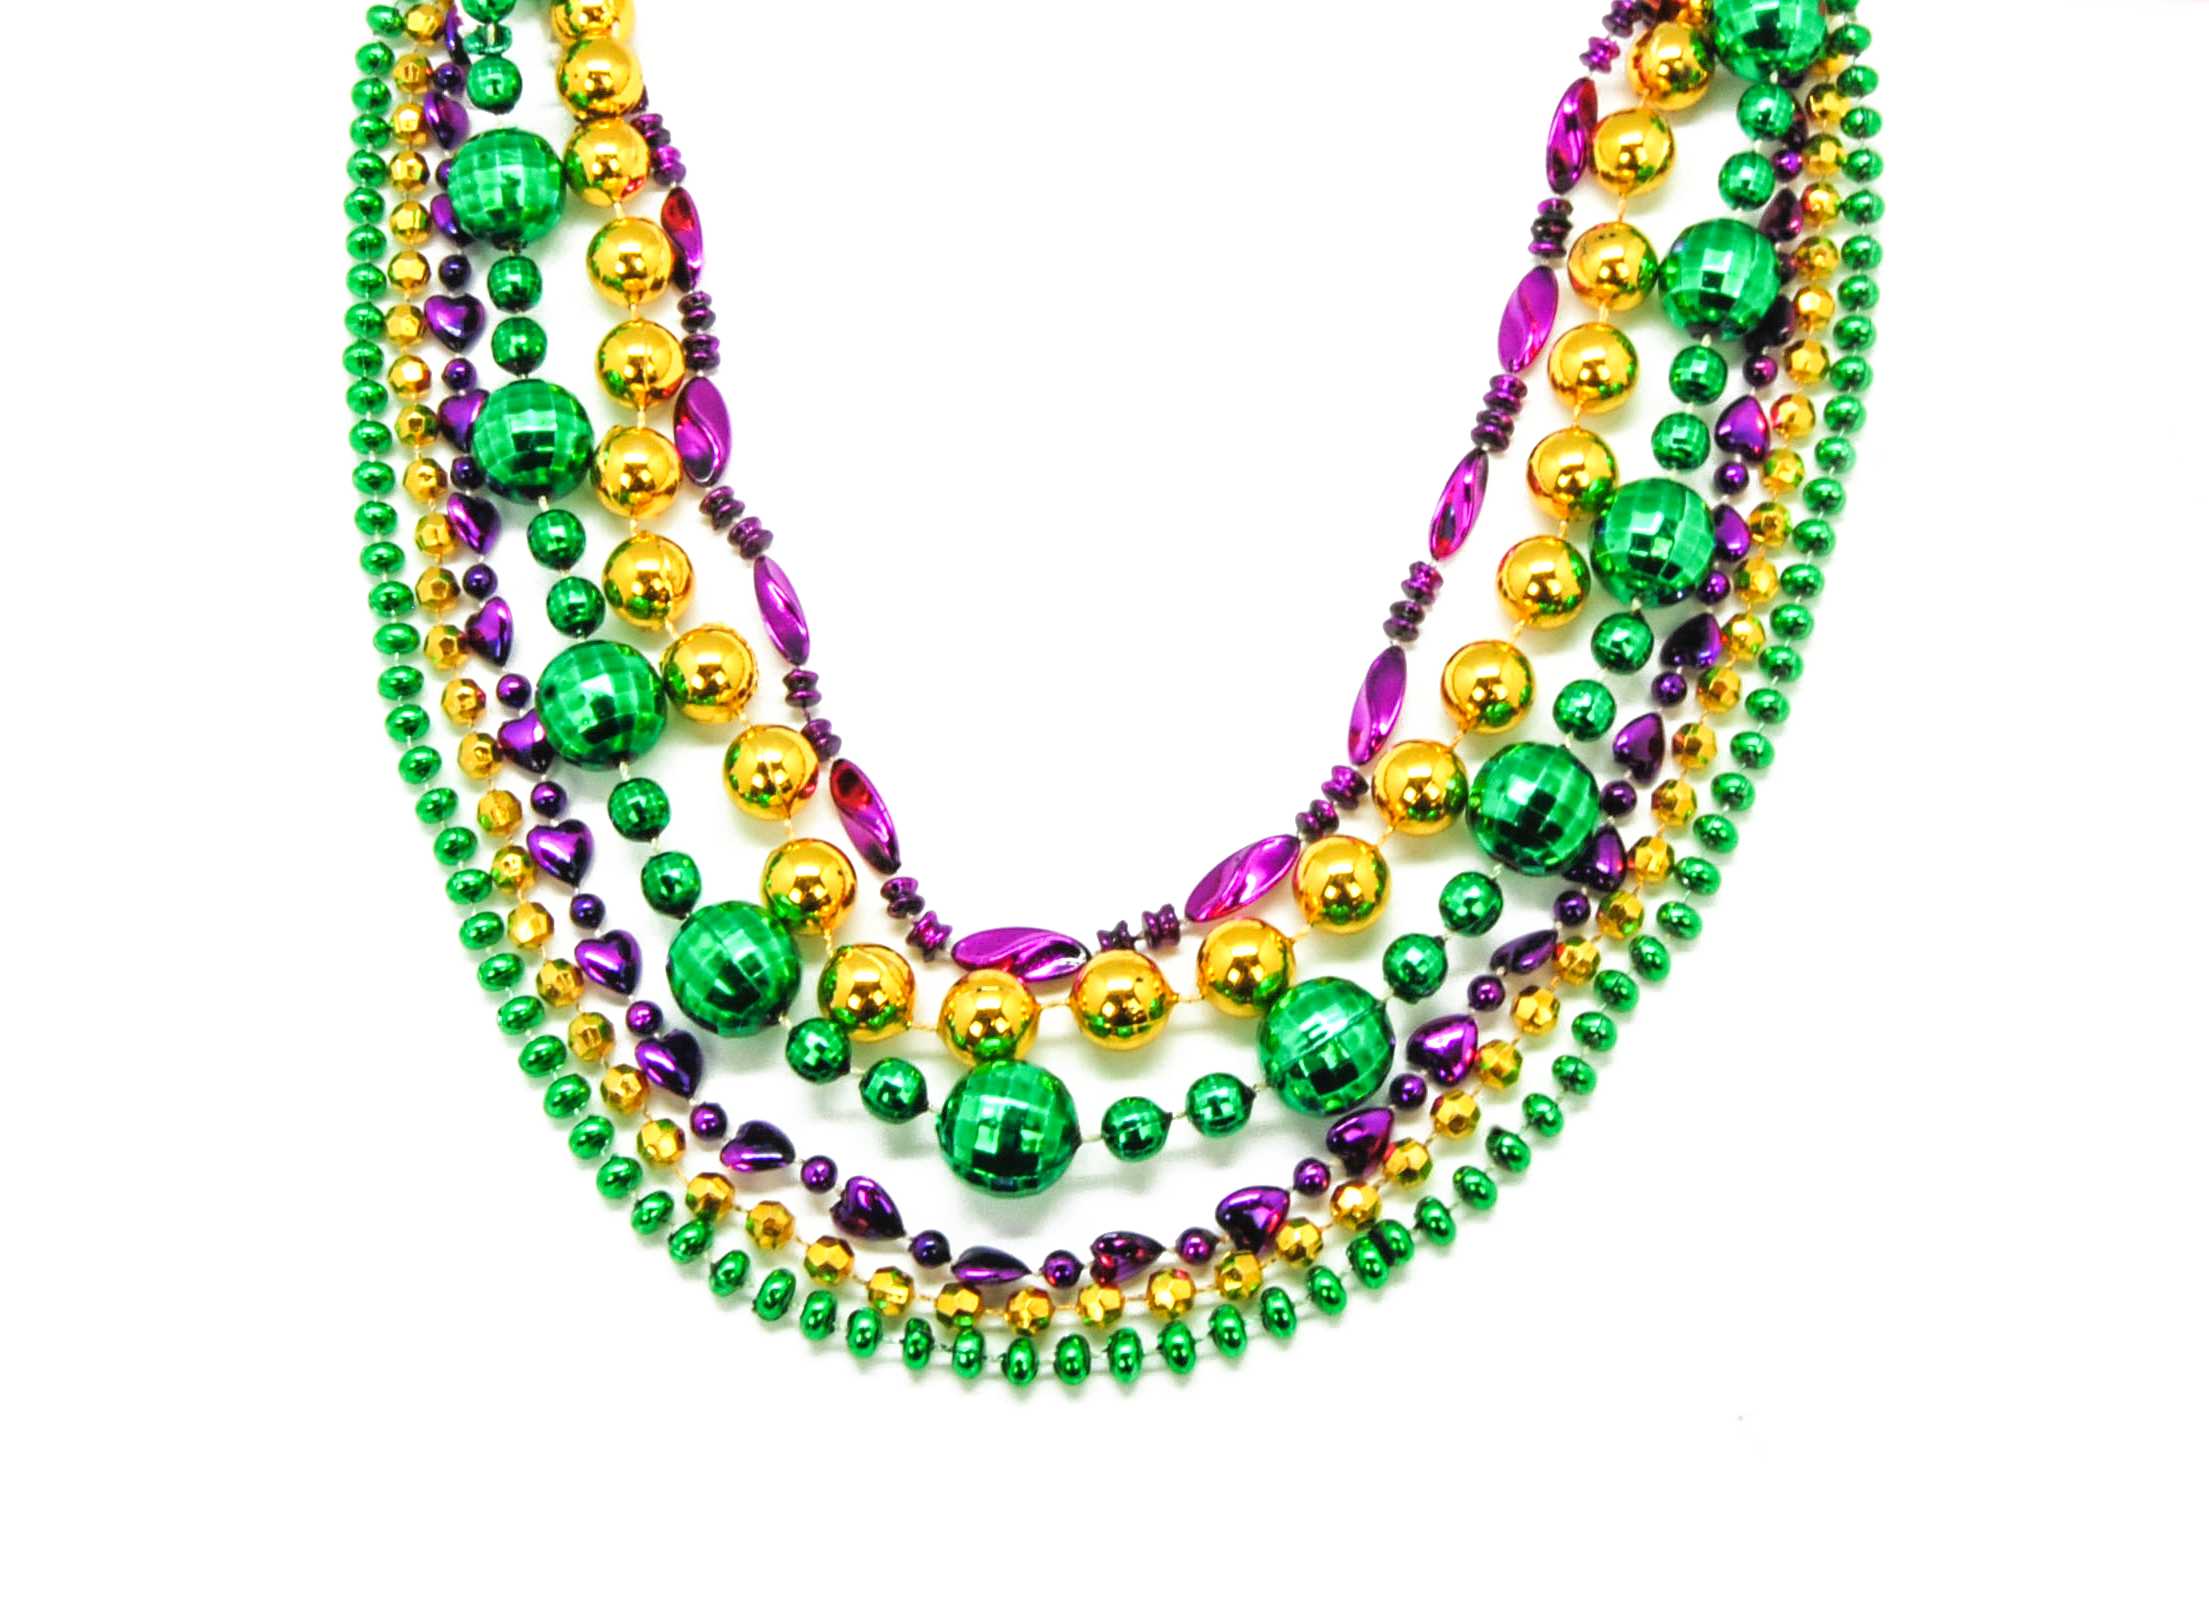 48 Mixed Beads Purple, Green, and Gold